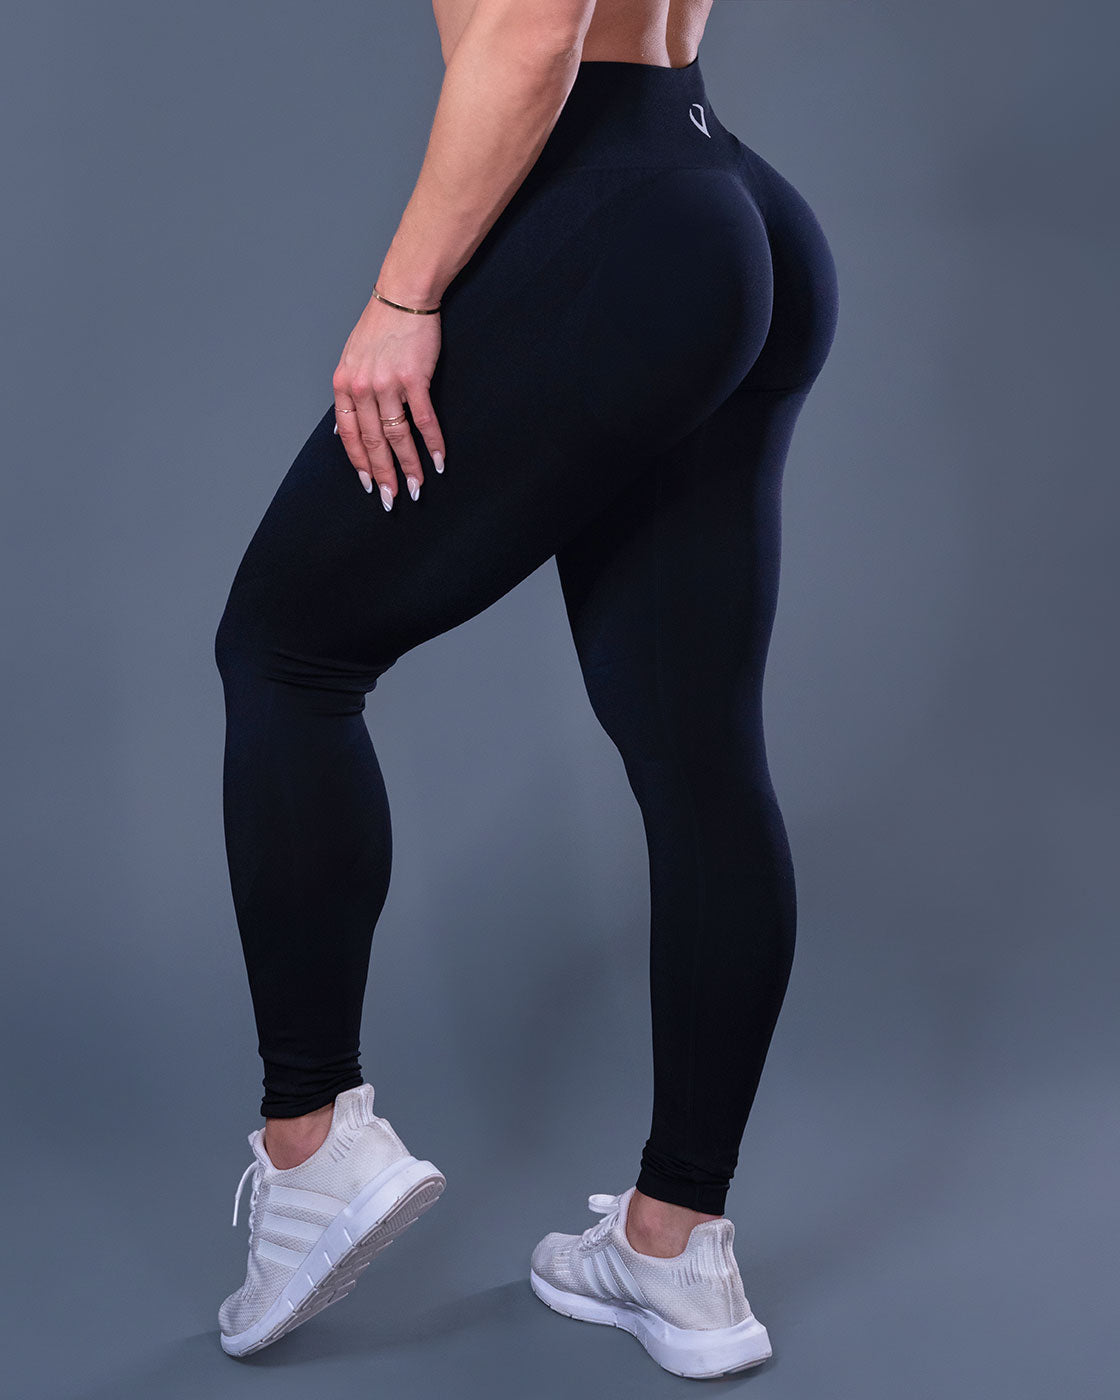 Love & Other Things gym seamless contrast leggings in tangerine